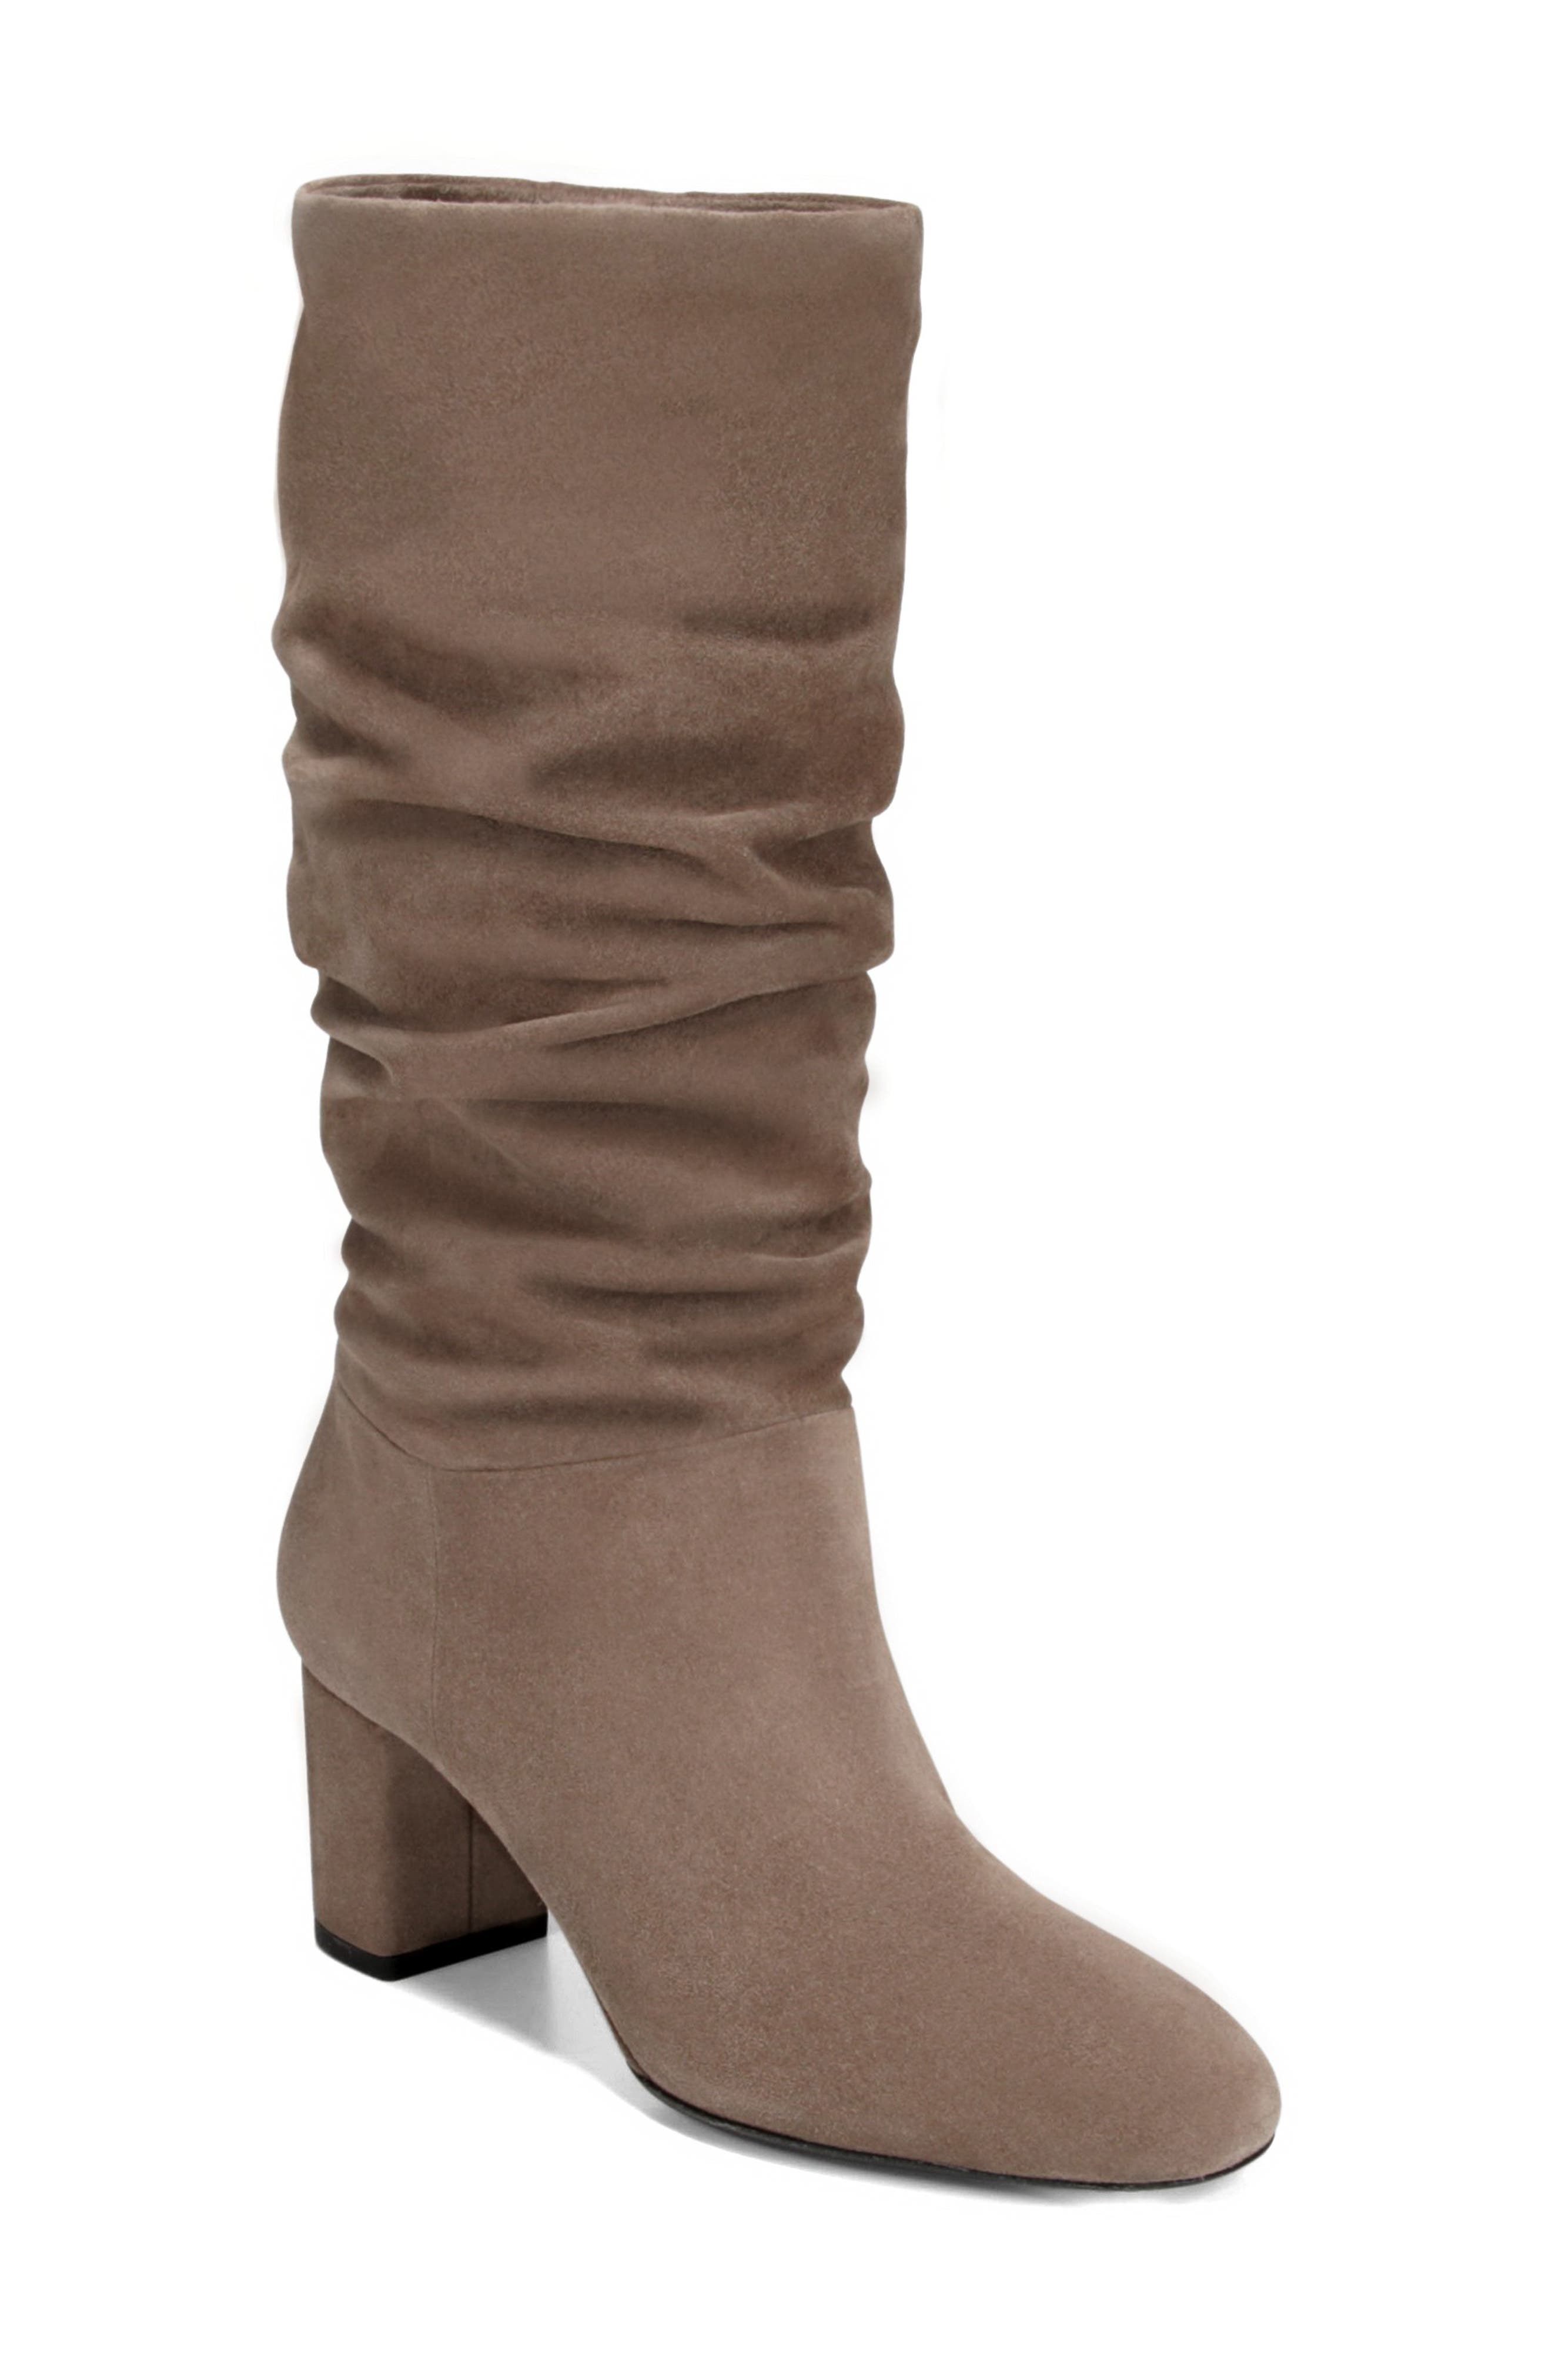 slouchy boots canada